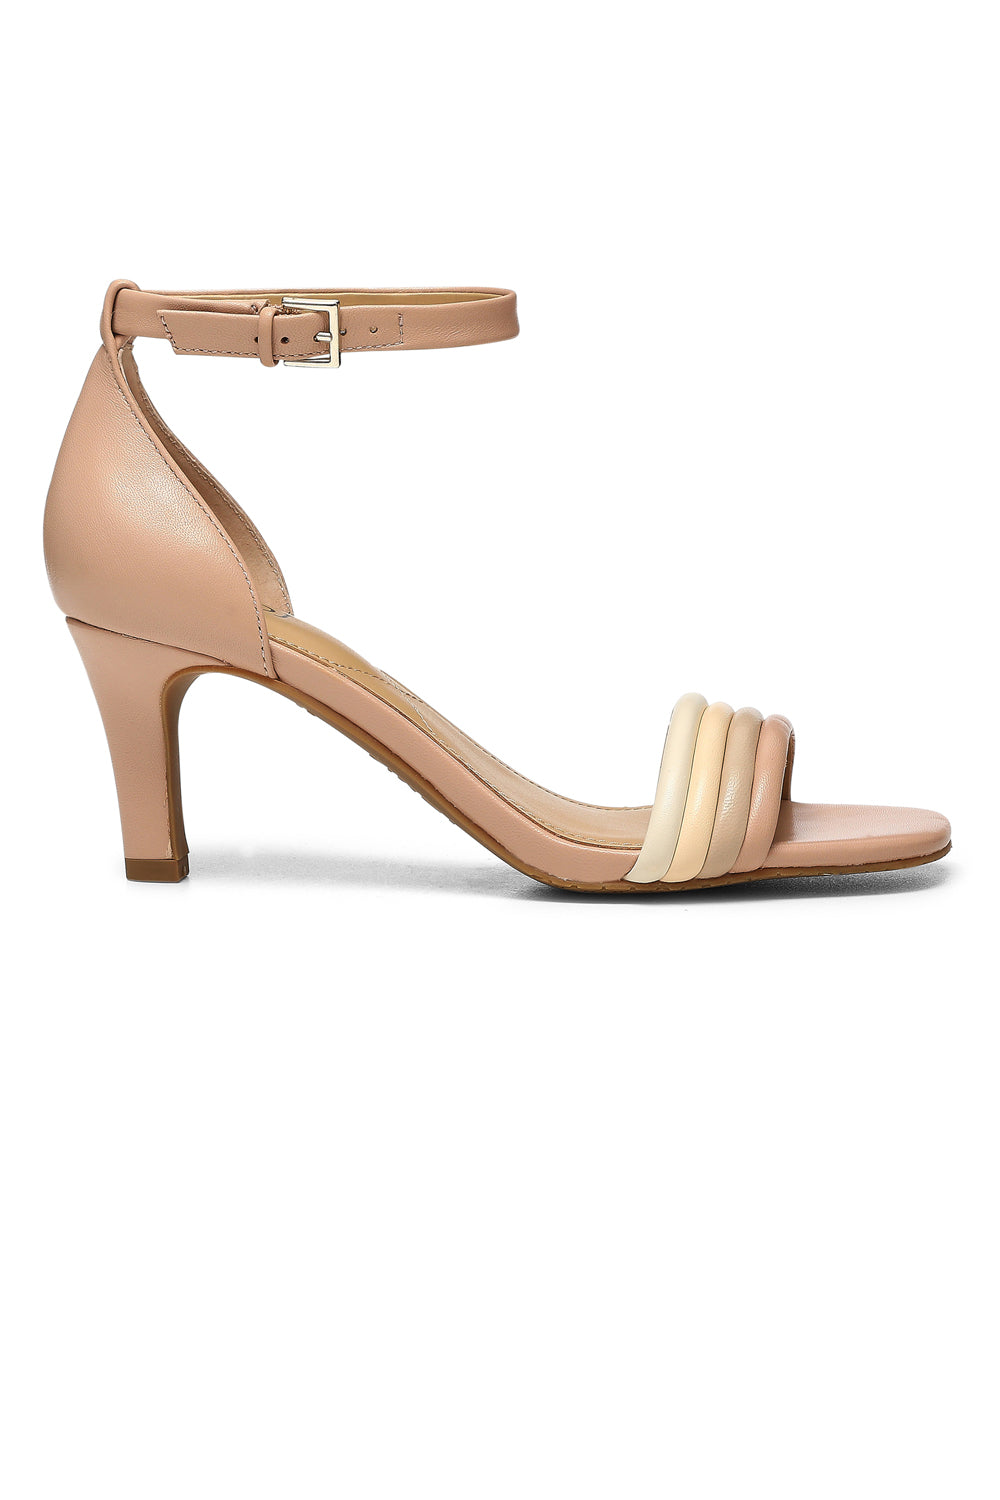 NYDJ Addie Sandals In Nappa Leather - Off White